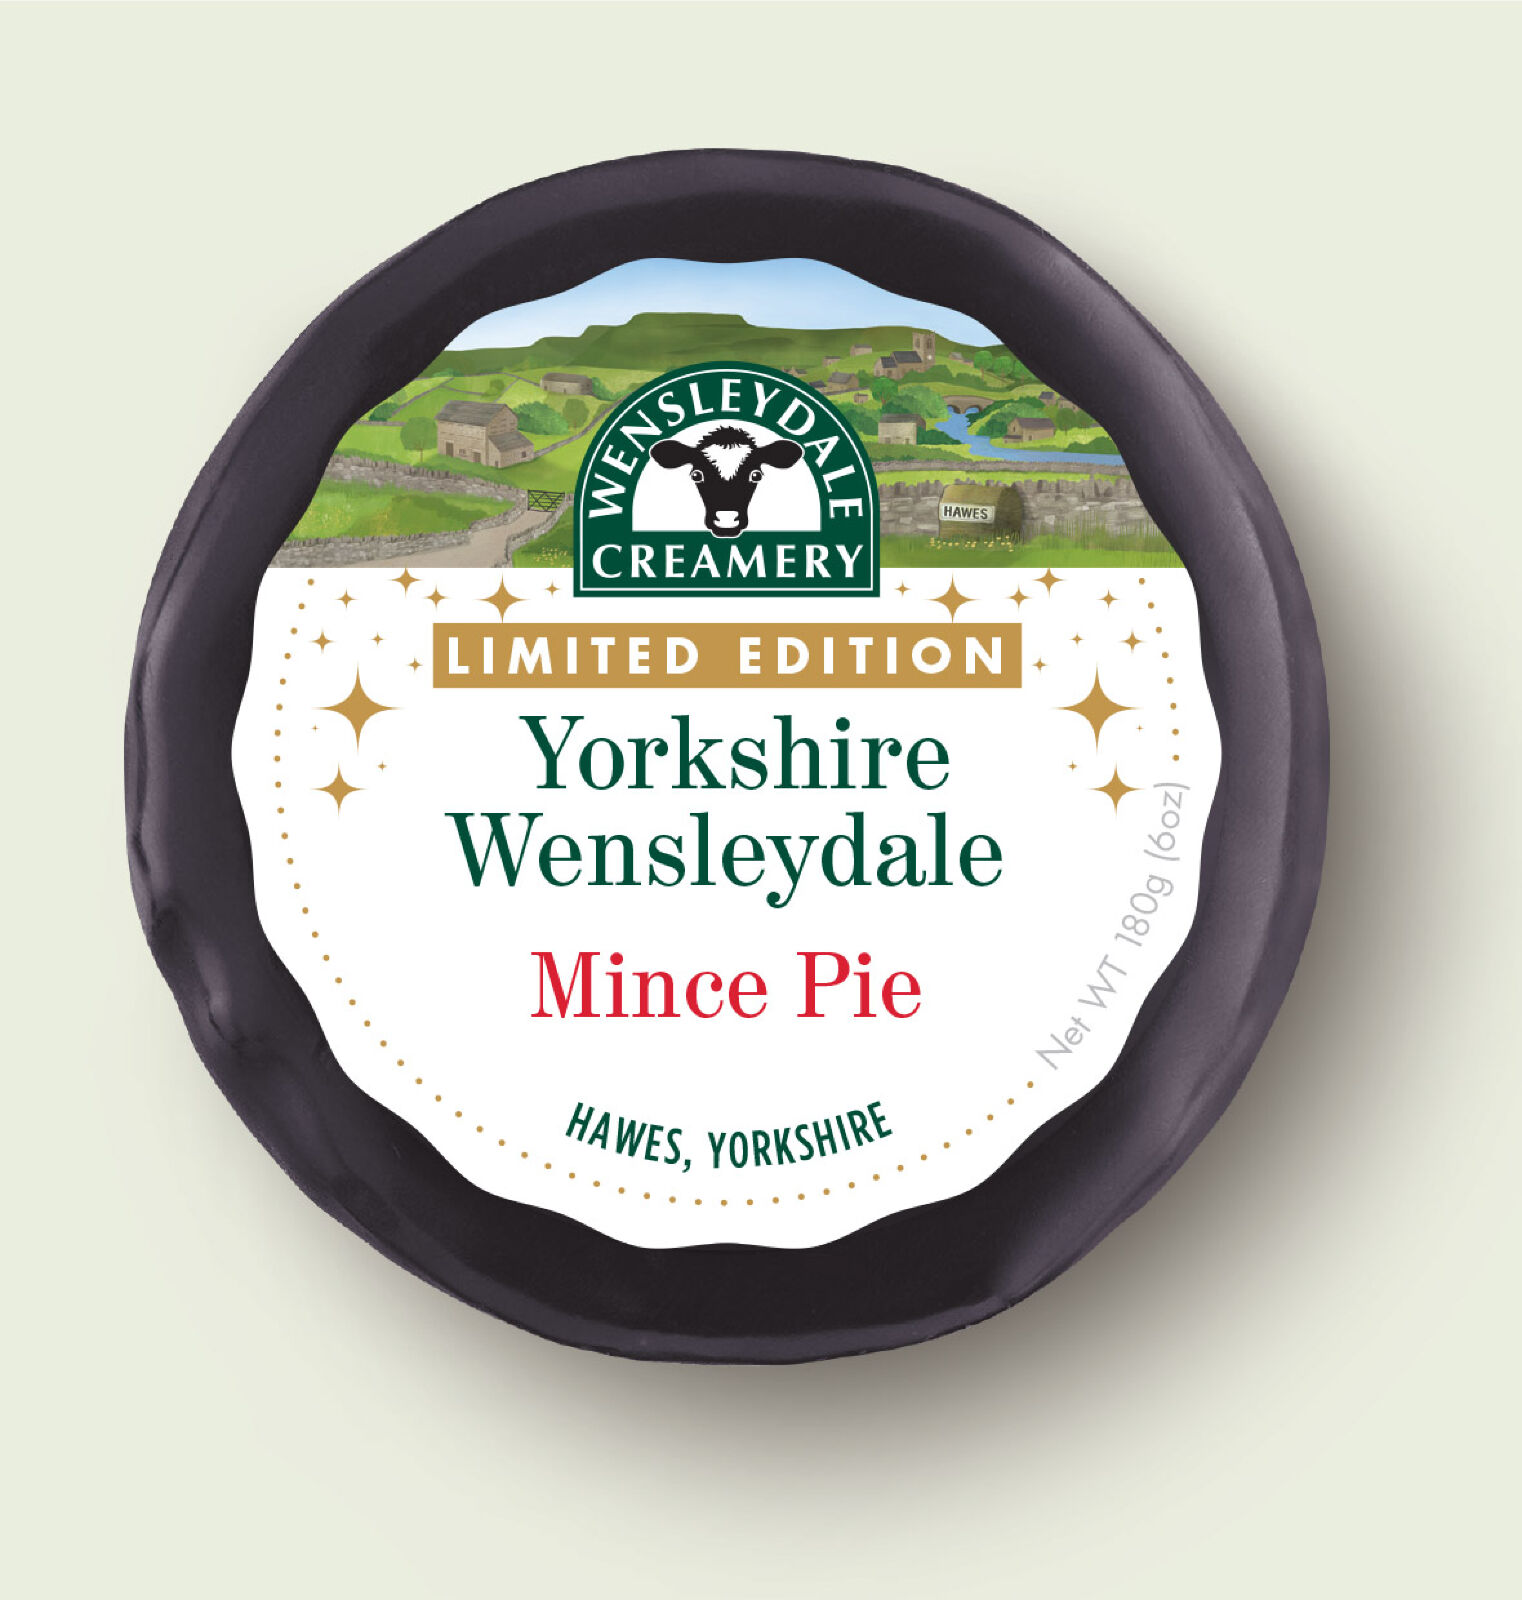 90d4a8_LE Yorkshire Wensleydale Mince Pie Truckle.jpg